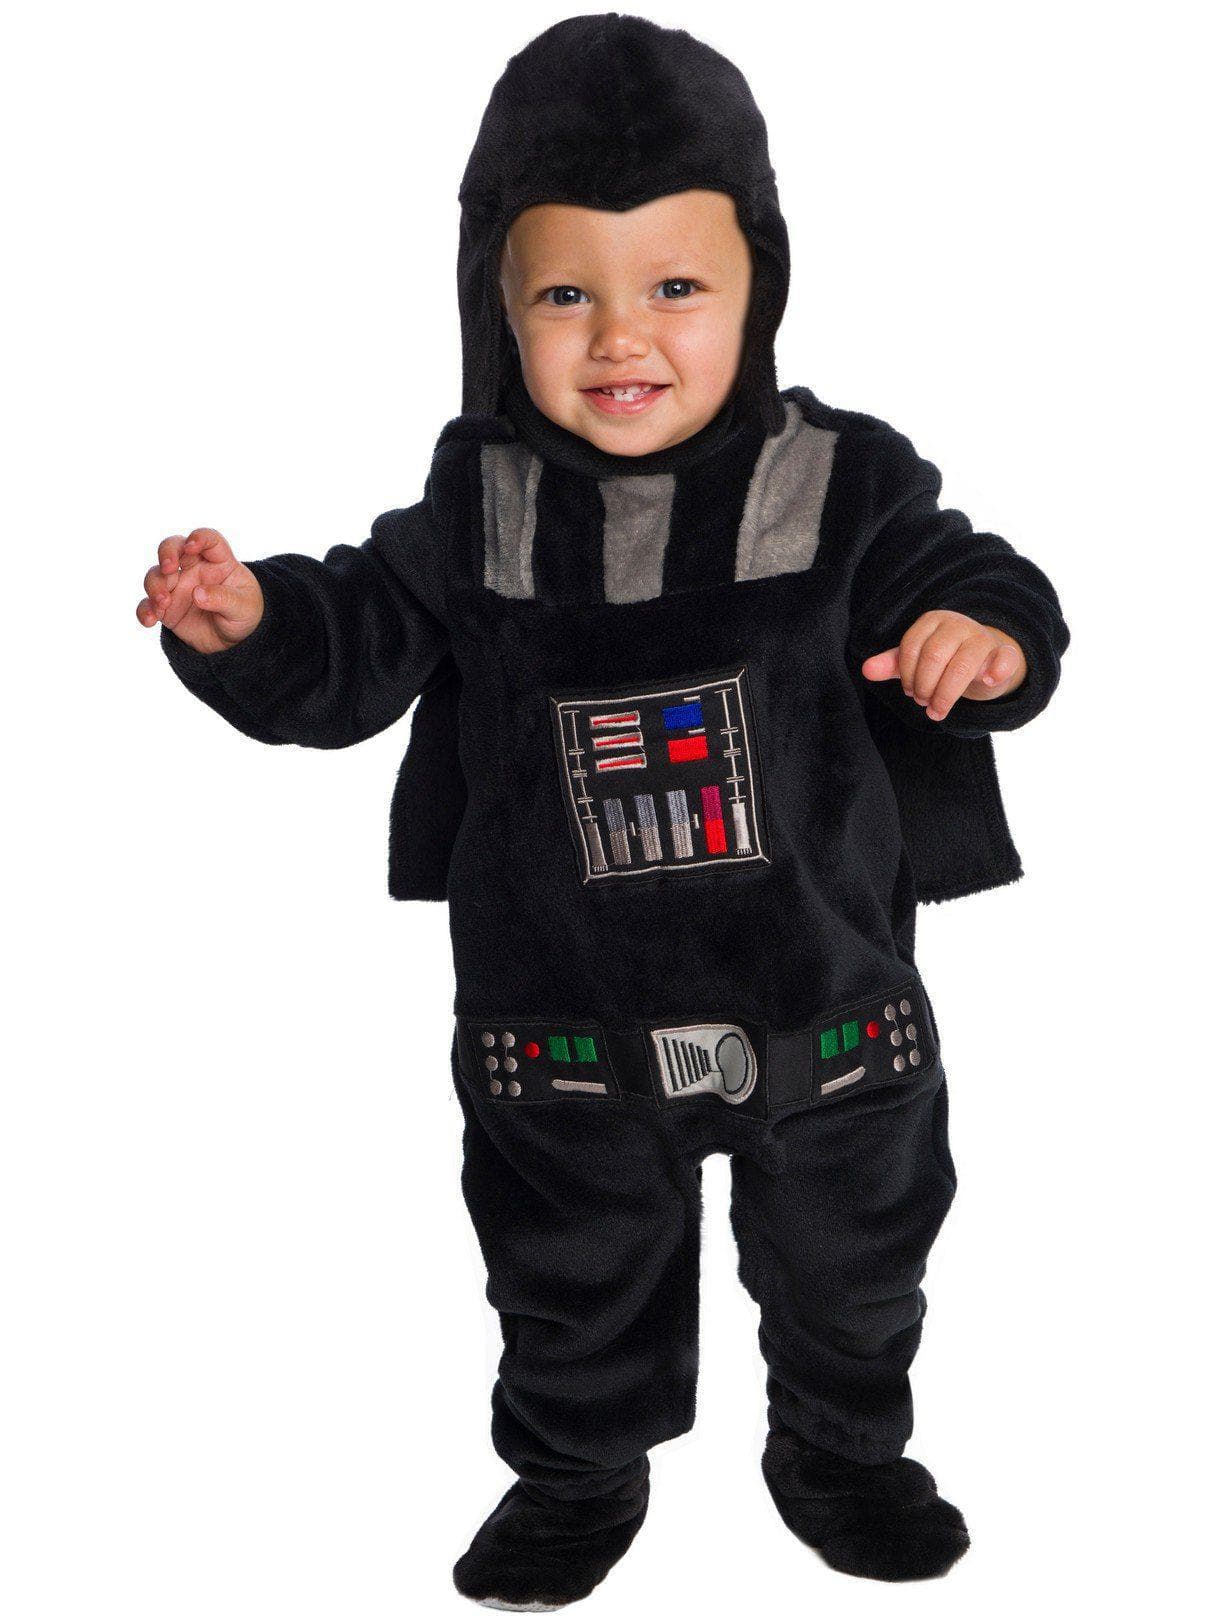 Baby/Toddler Classic Star Wars Darth Vader Deluxe Costume - costumes.com